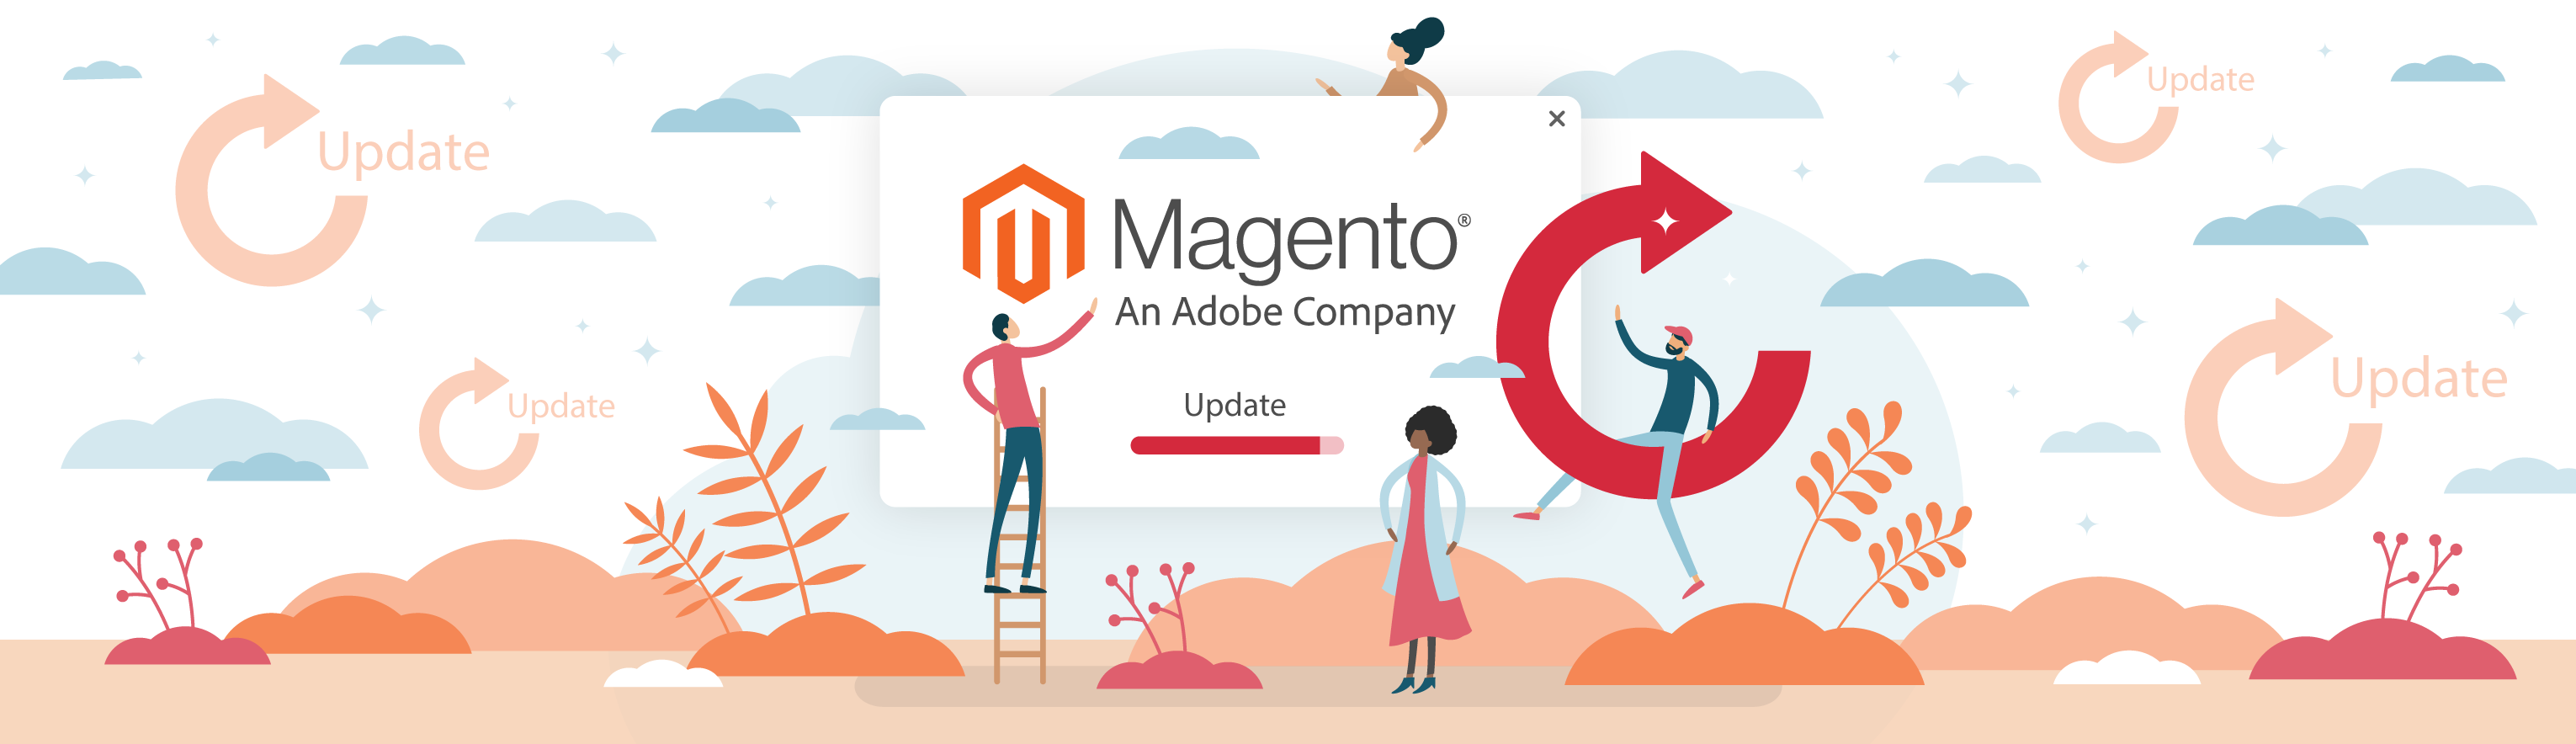 <span id="hs_cos_wrapper_name" class="hs_cos_wrapper hs_cos_wrapper_meta_field hs_cos_wrapper_type_text" style="" data-hs-cos-general-type="meta_field" data-hs-cos-type="text" >Magento 2.3 End of Life: perché devi aggiornare Magento adesso!</span>